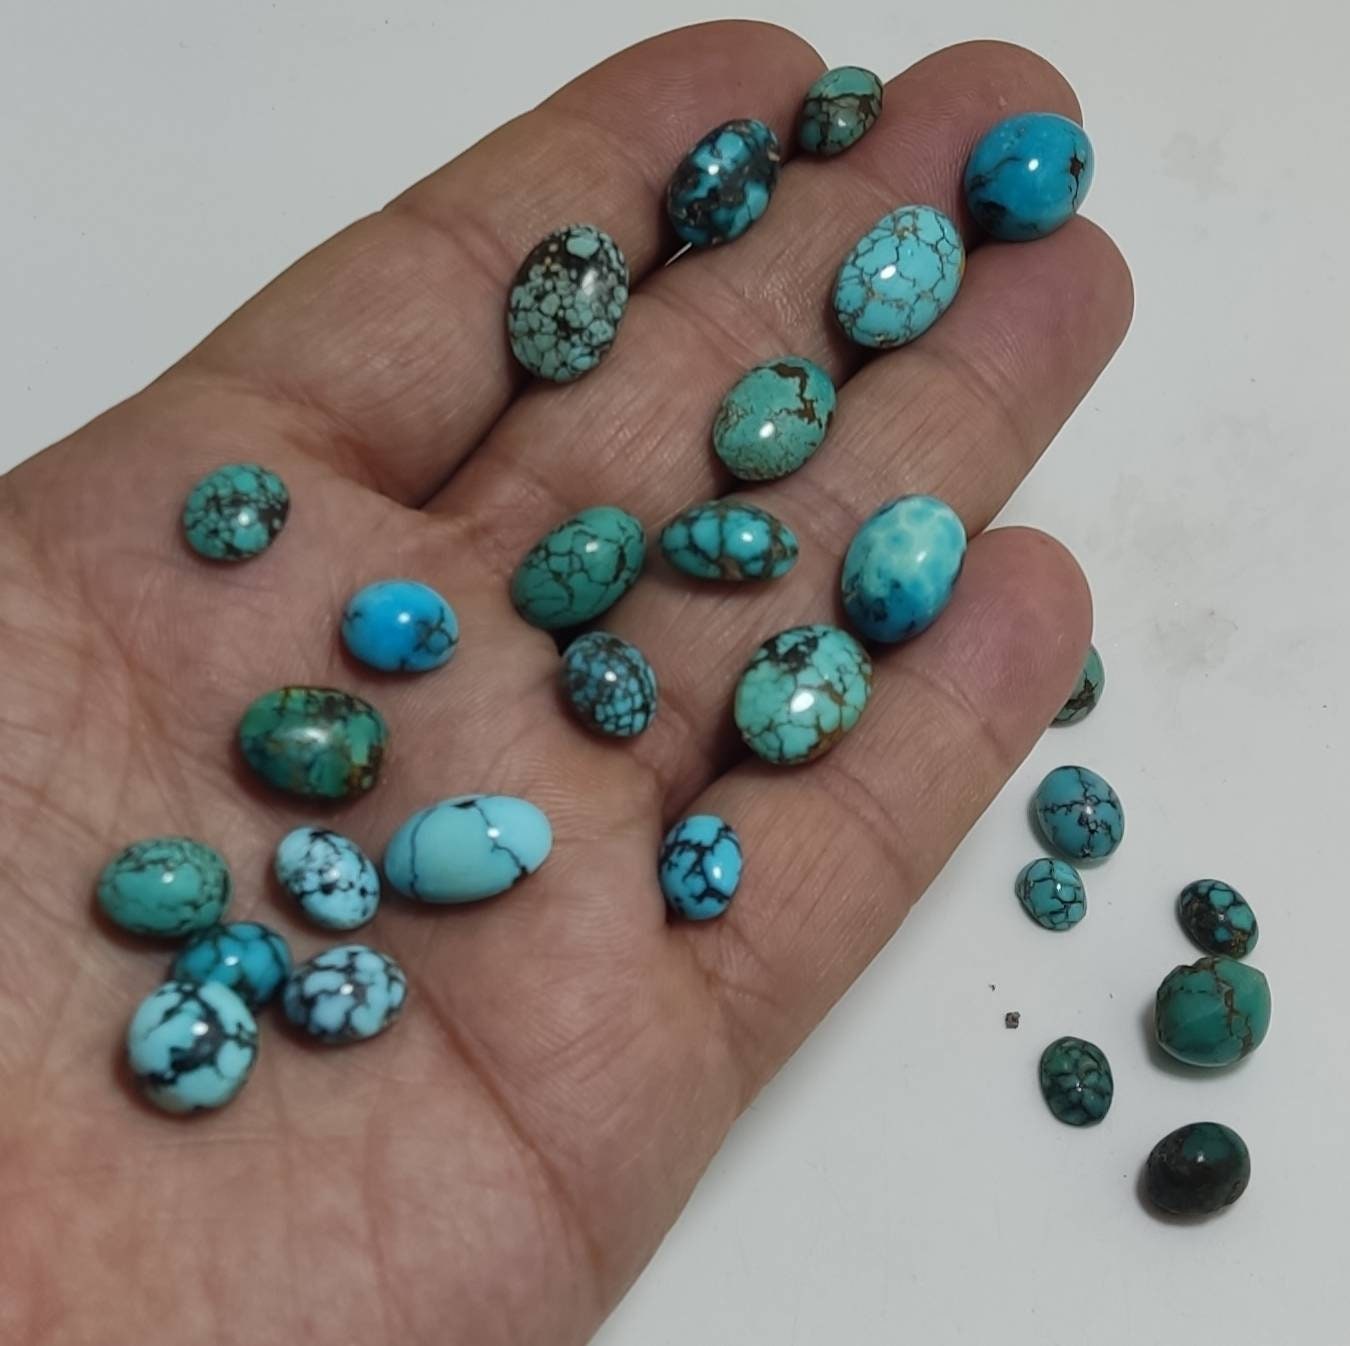 Turquoise Cabochons lot 28 grams